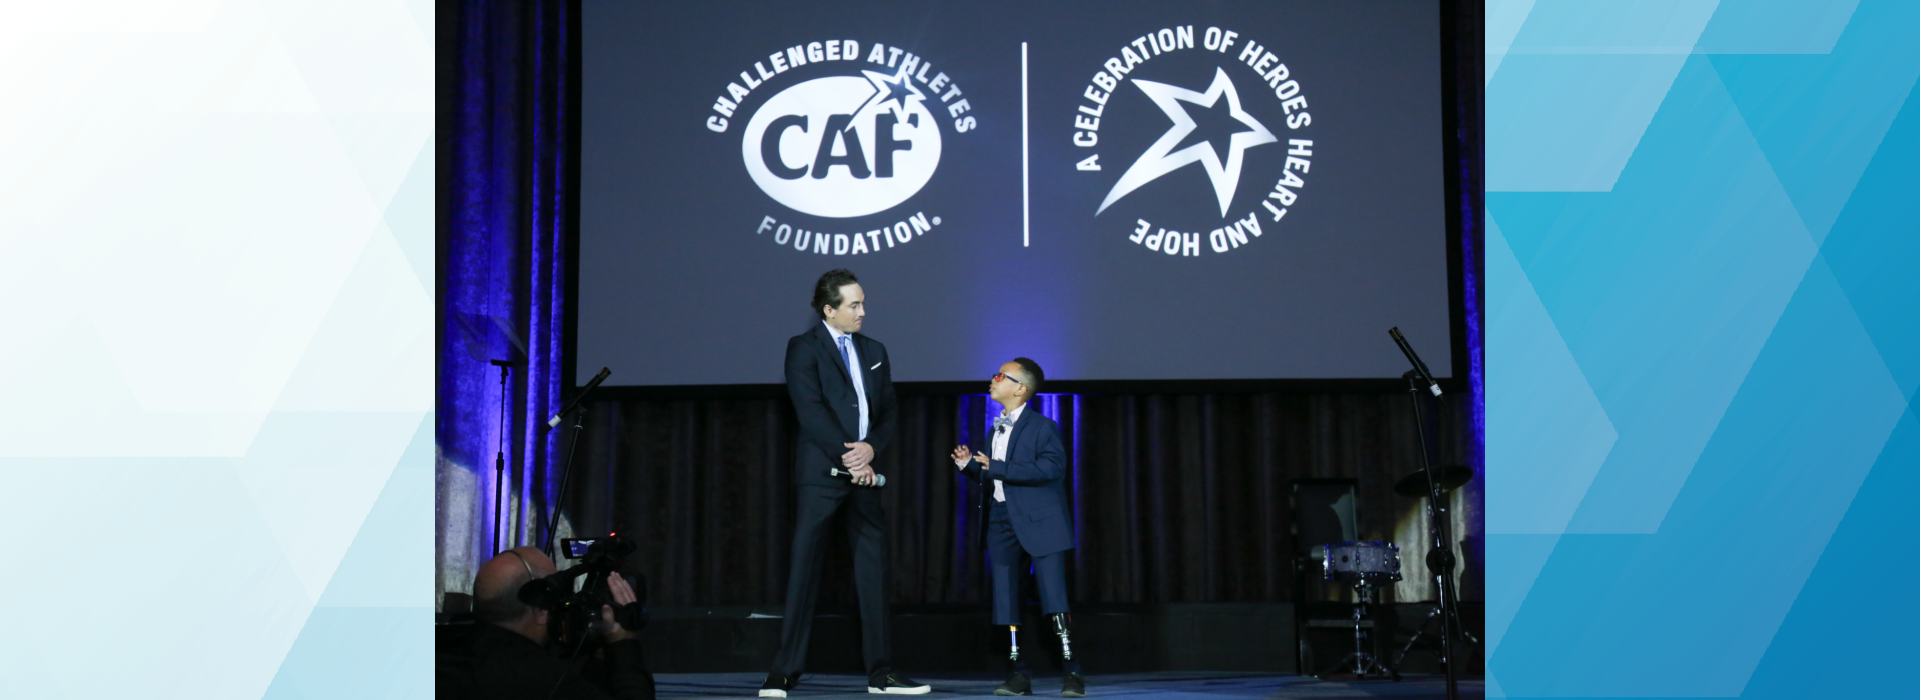 https://www.challengedathletes.org/wp-content/uploads/2021/06/2019-Heroes-Heart-and-Hope-Gala-Rudy-and-Logan-1920-x-700.png